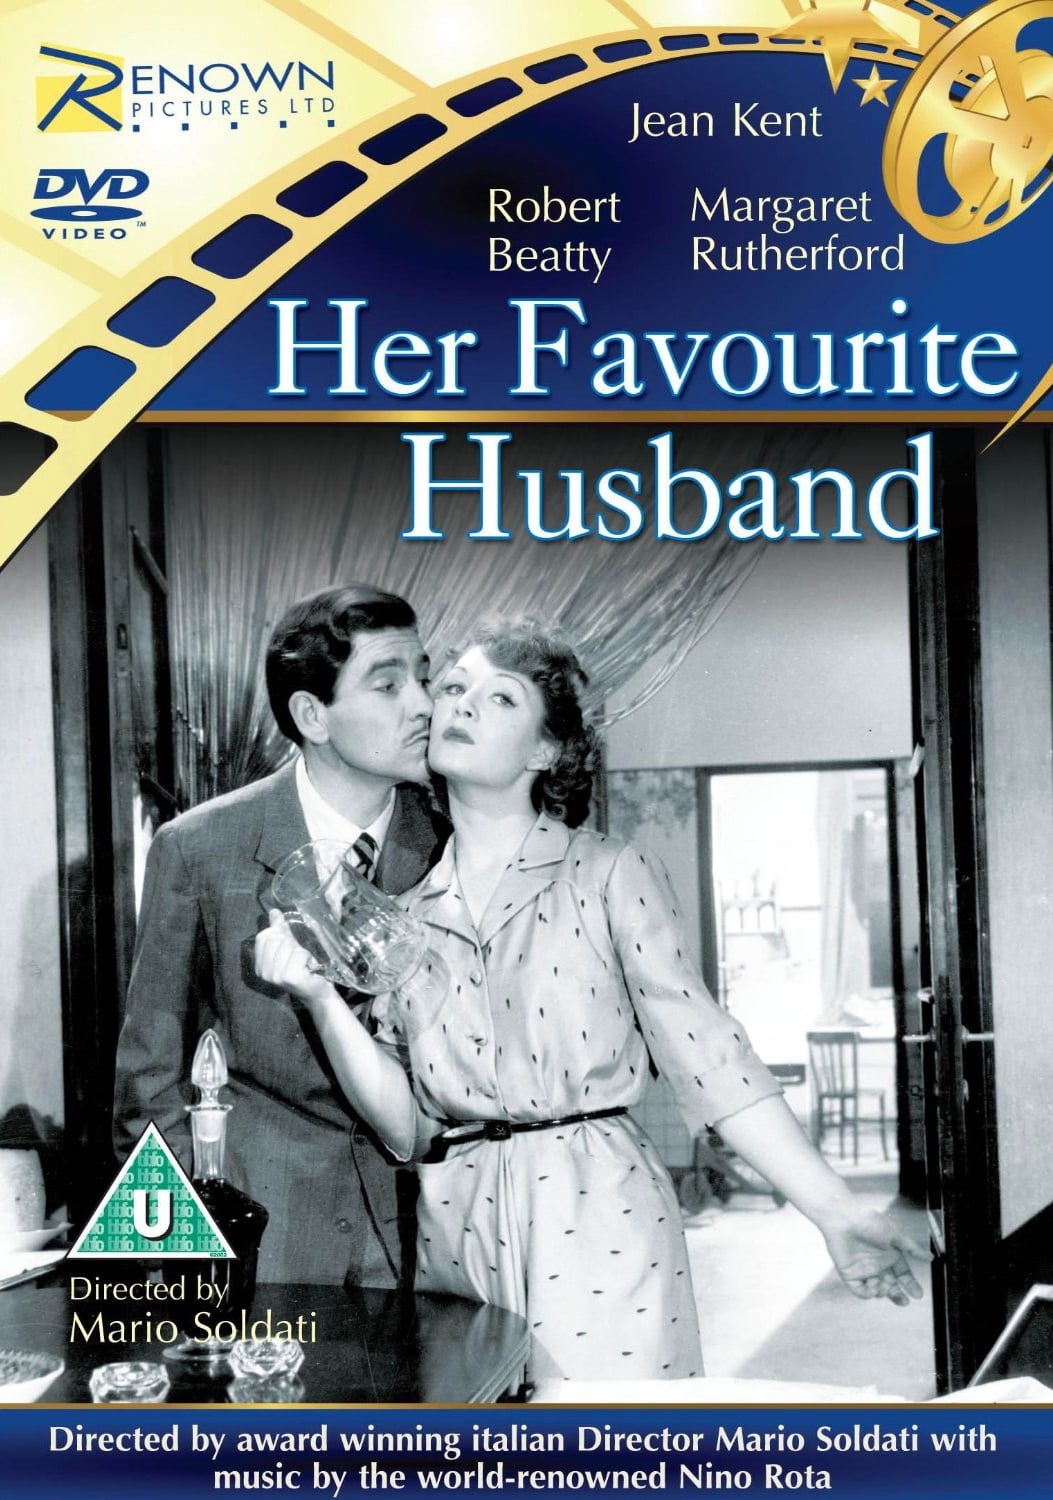 Her Favourite Husband (1950)